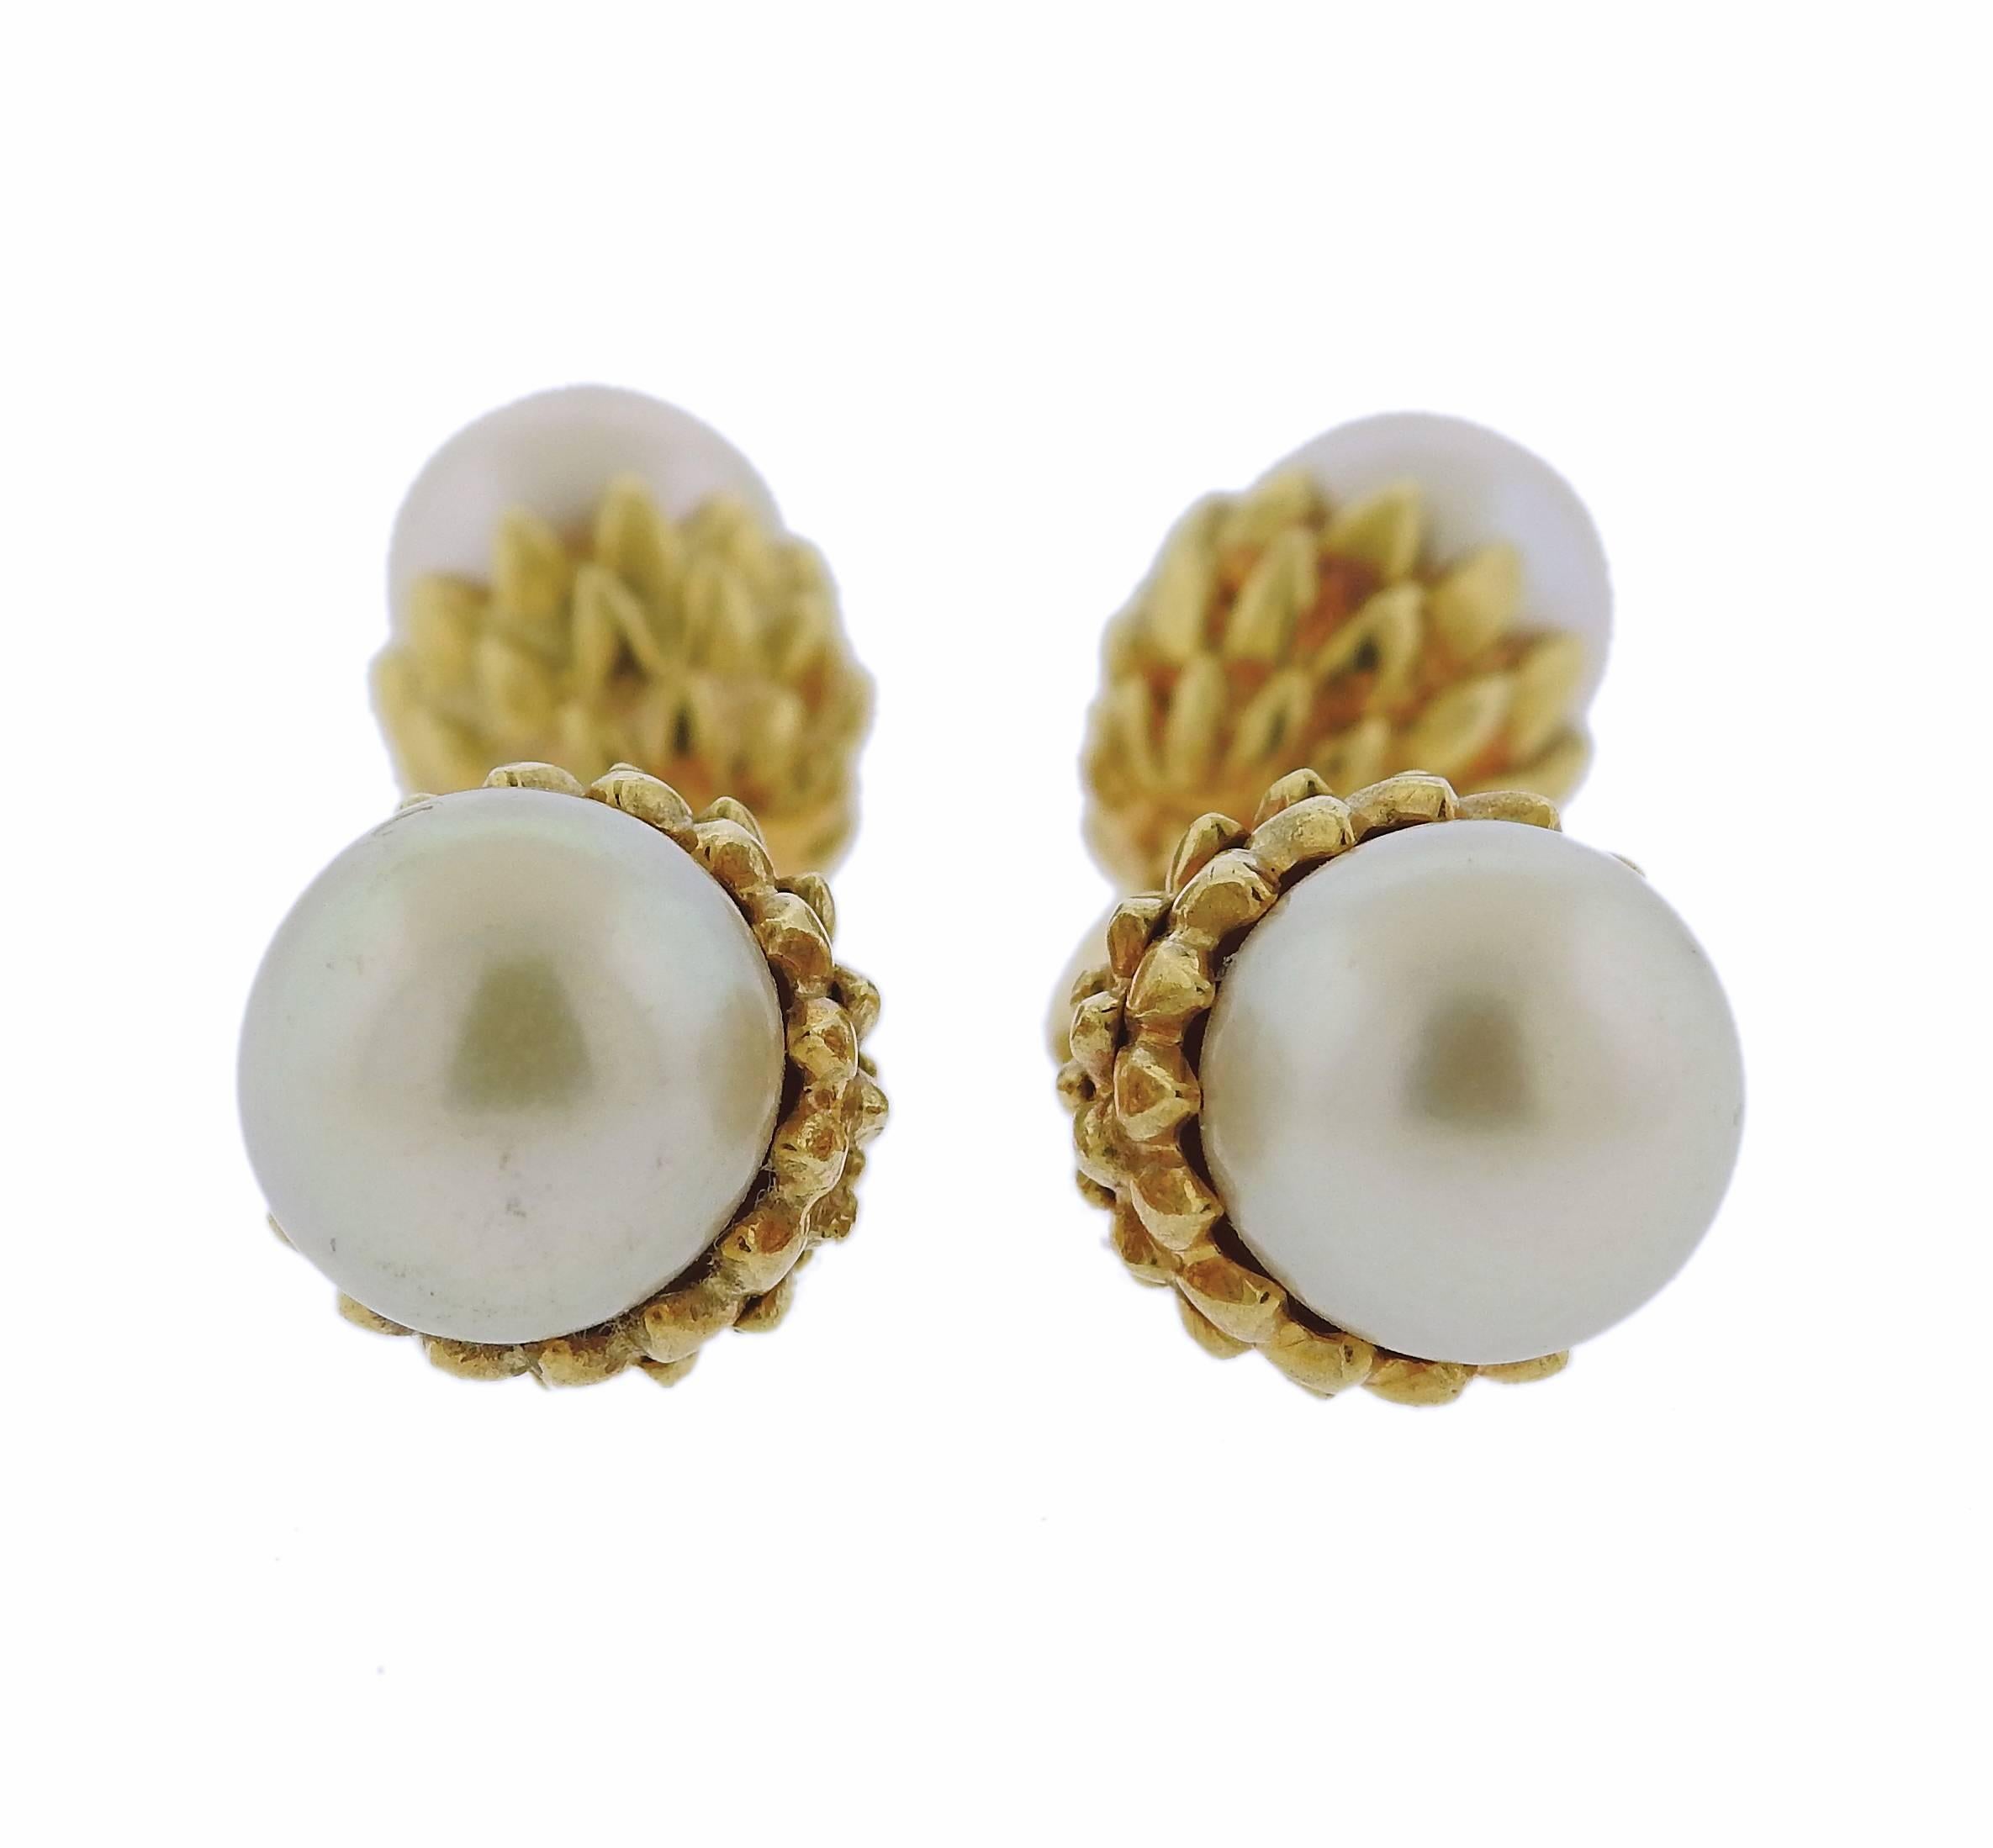 Pair of 18k yellow gold cufflinks, set with 8.2mm and 9.6mm pearls. Top measures 11mm in diameter, back - 9.3mm in diameter, weight - 18.2 grams. Marked: 18k.